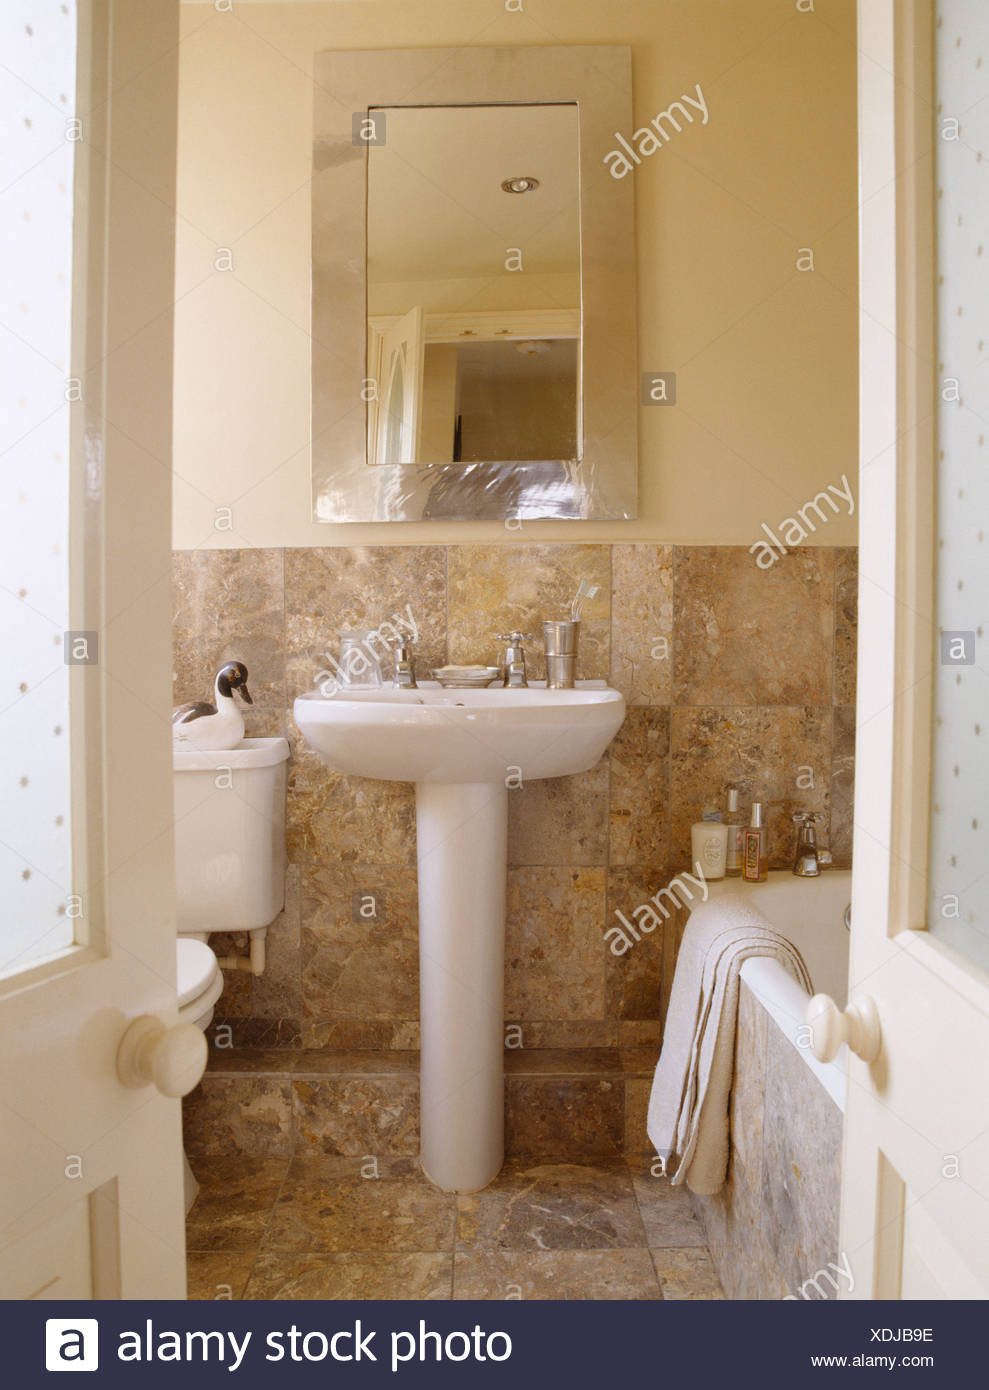 Rectangular Mirror Above Pedestal Basin In Country Bathroom With